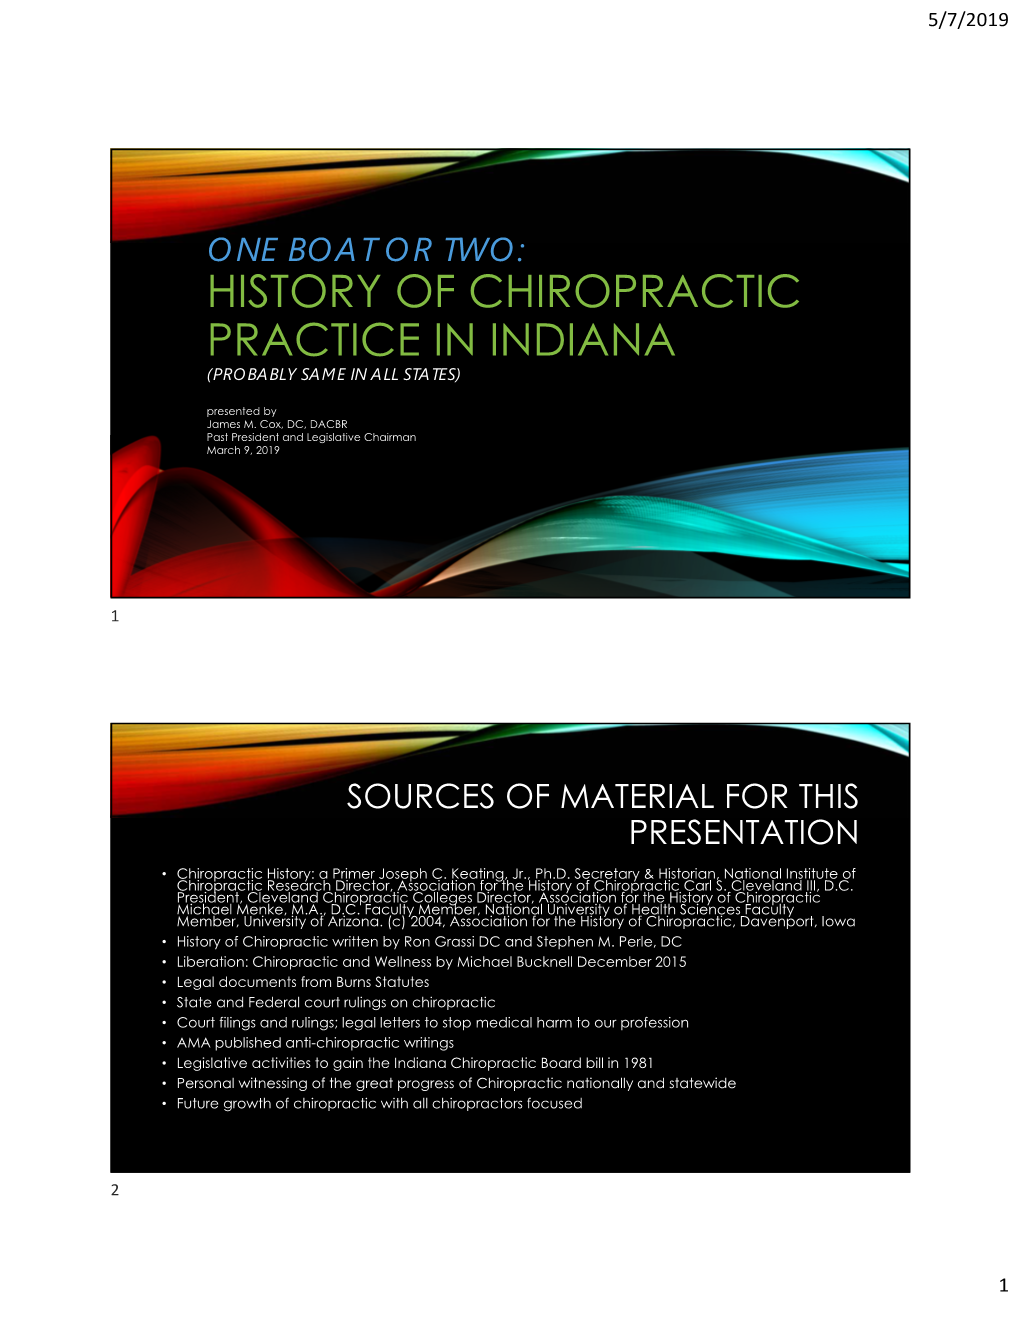 History of Chiropractic Practice in Indiana (Probably Same in All States)